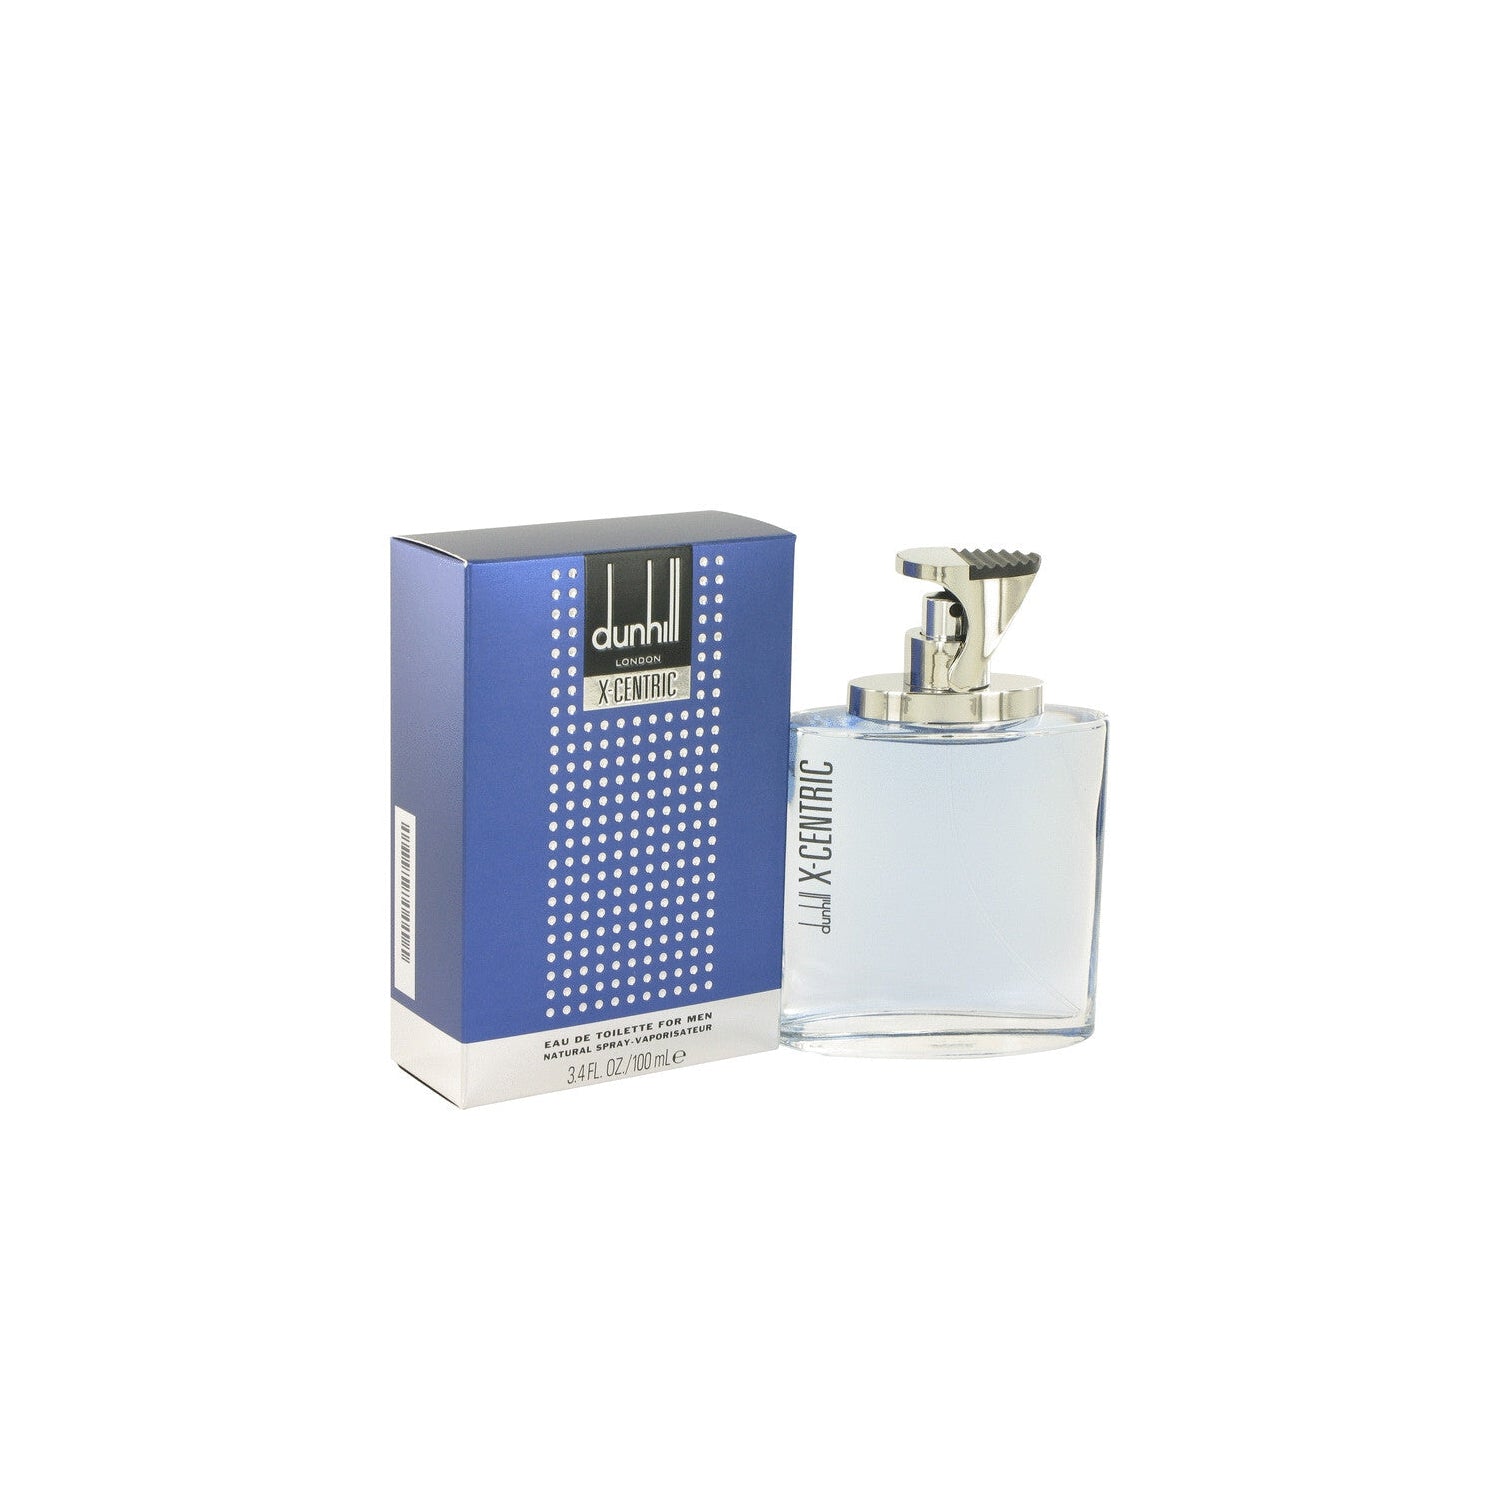 Dunhill Xcentric M 100ml Boxed